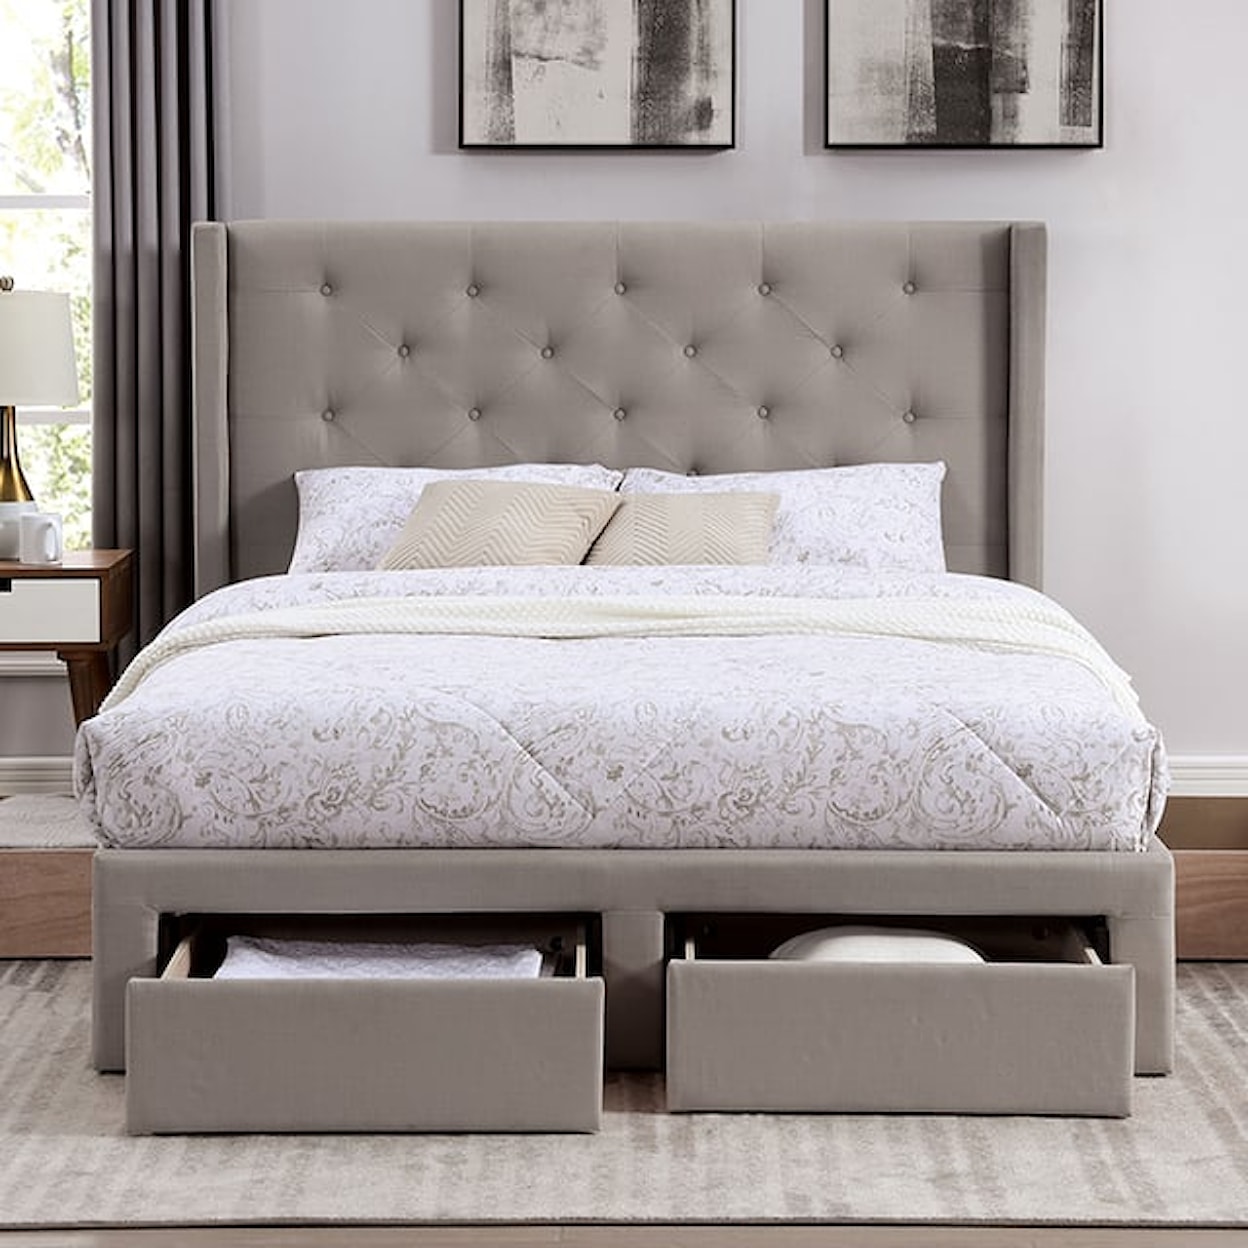 Furniture of America Mitchelle Upholstered King Storage Bed